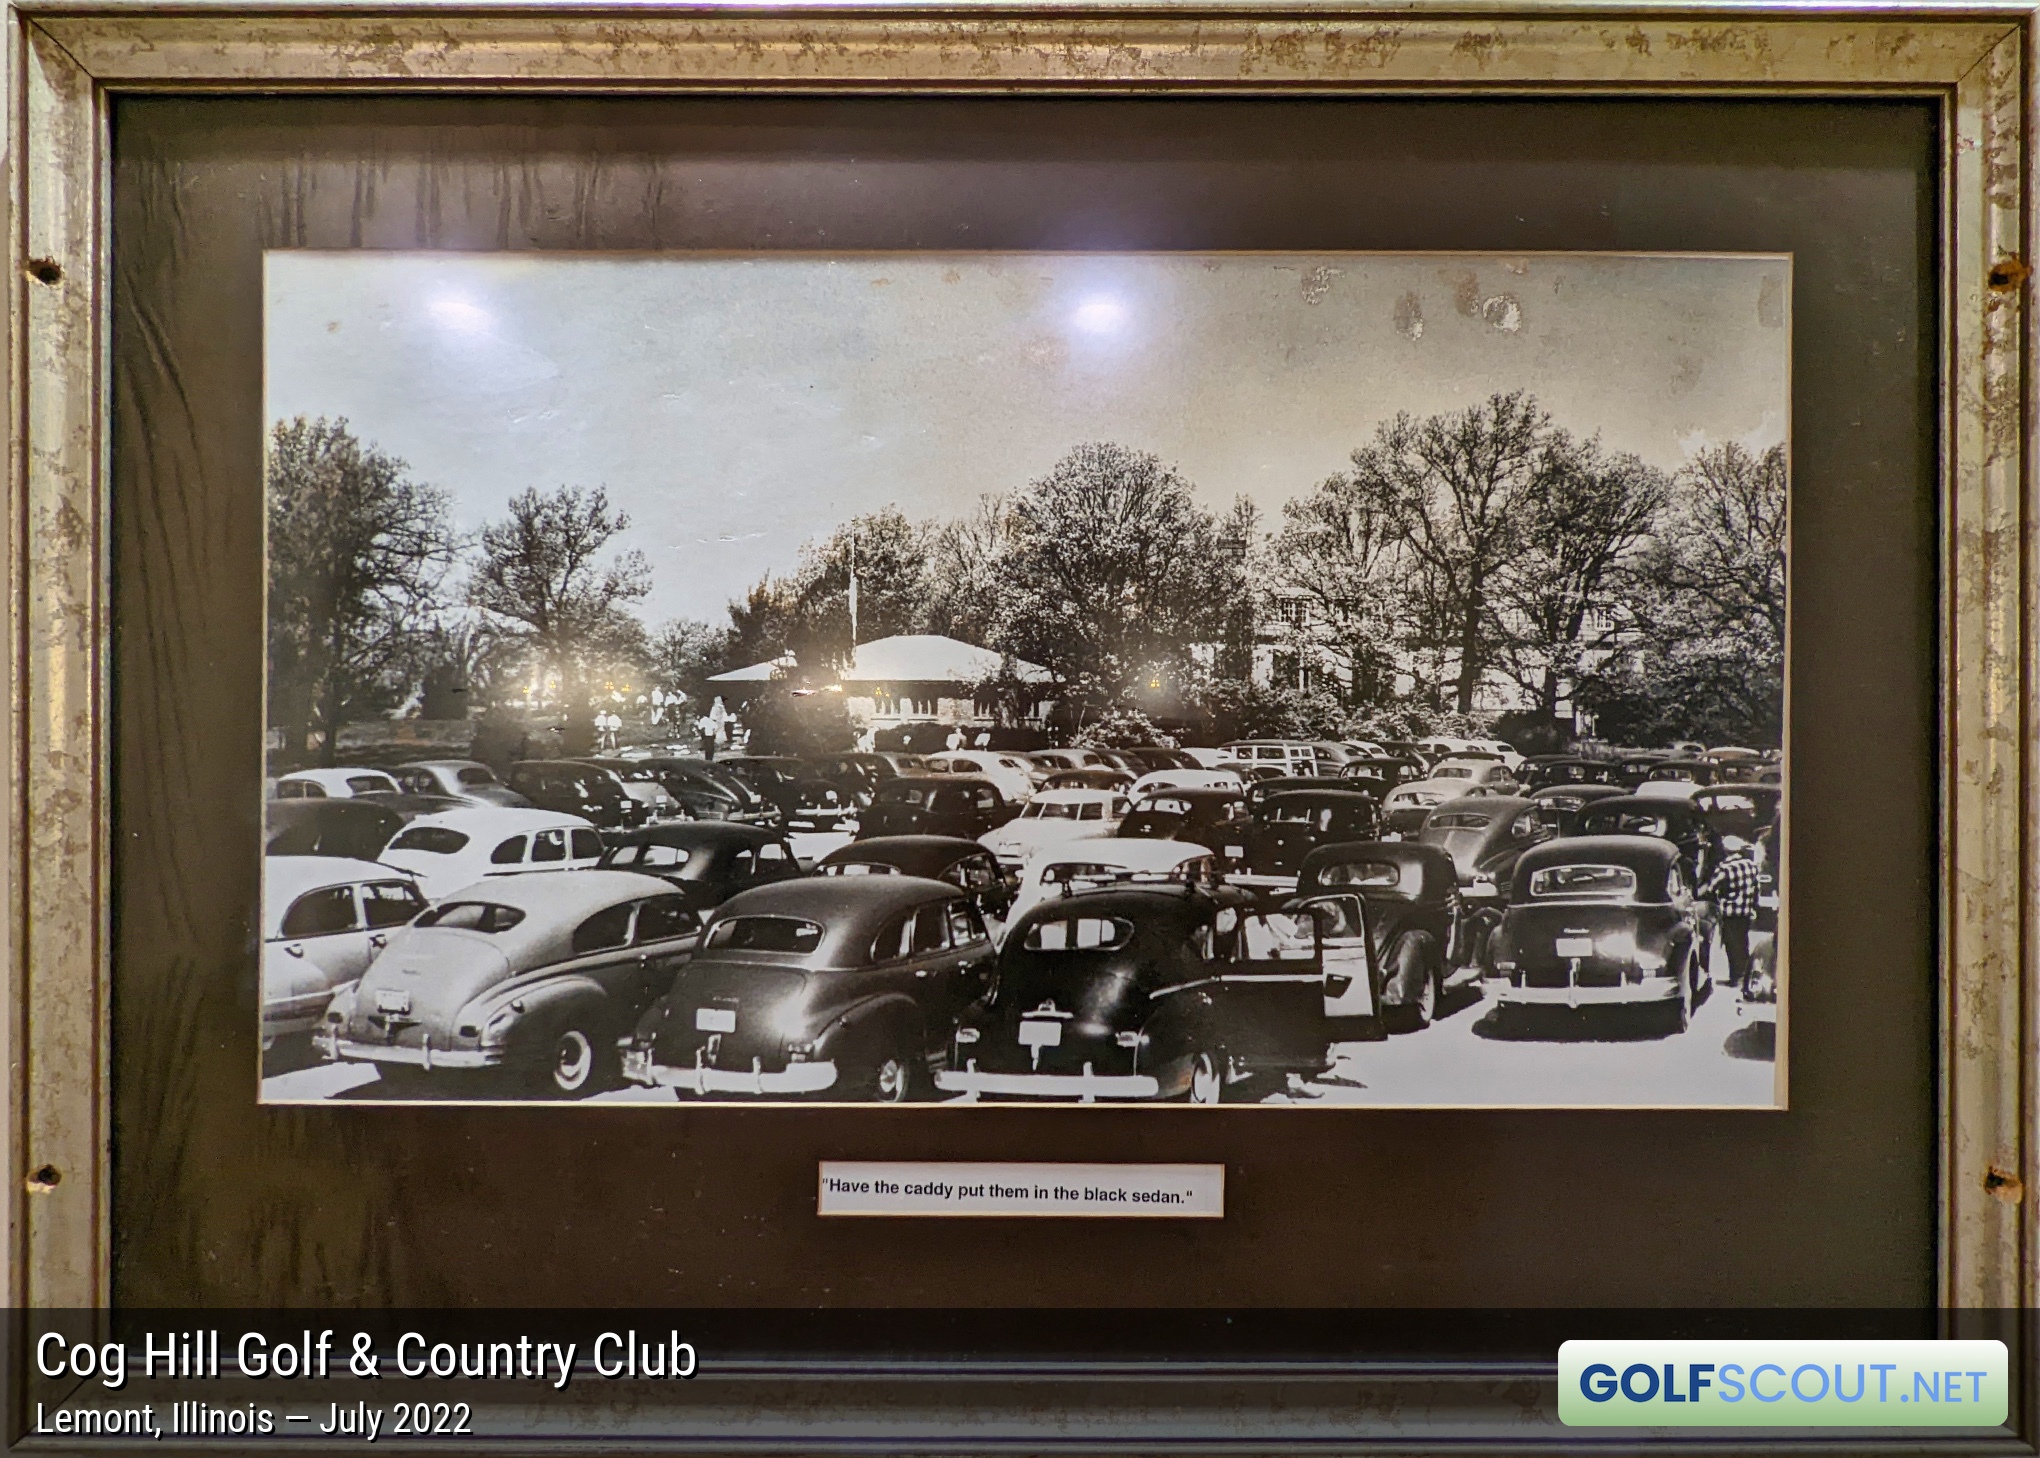 Miscellaneous photo of Cog Hill Course #3 in Lemont, Illinois. "Have the caddy put them in the black sedan."